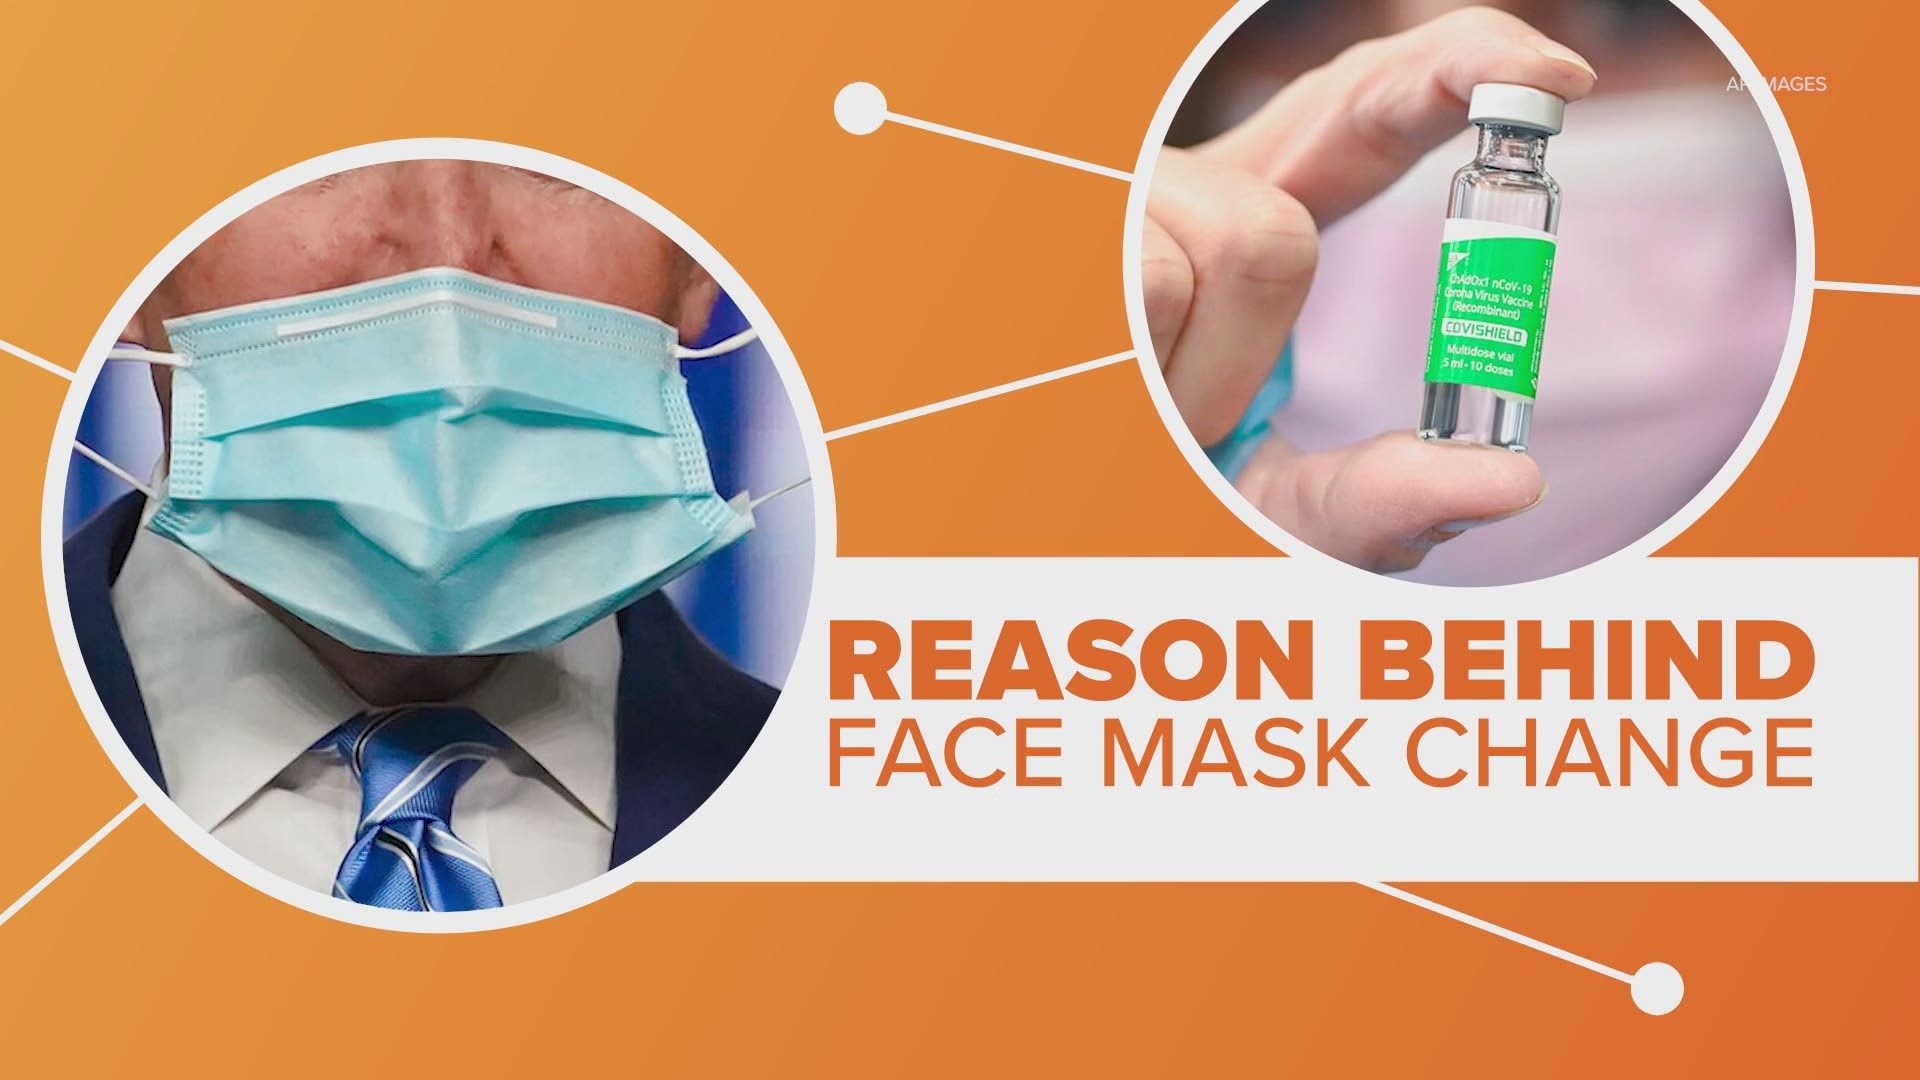 After being criticized for being too cautious the CDC has changed its policy on face masks. So why the change? Turns out the vaccines are that good.